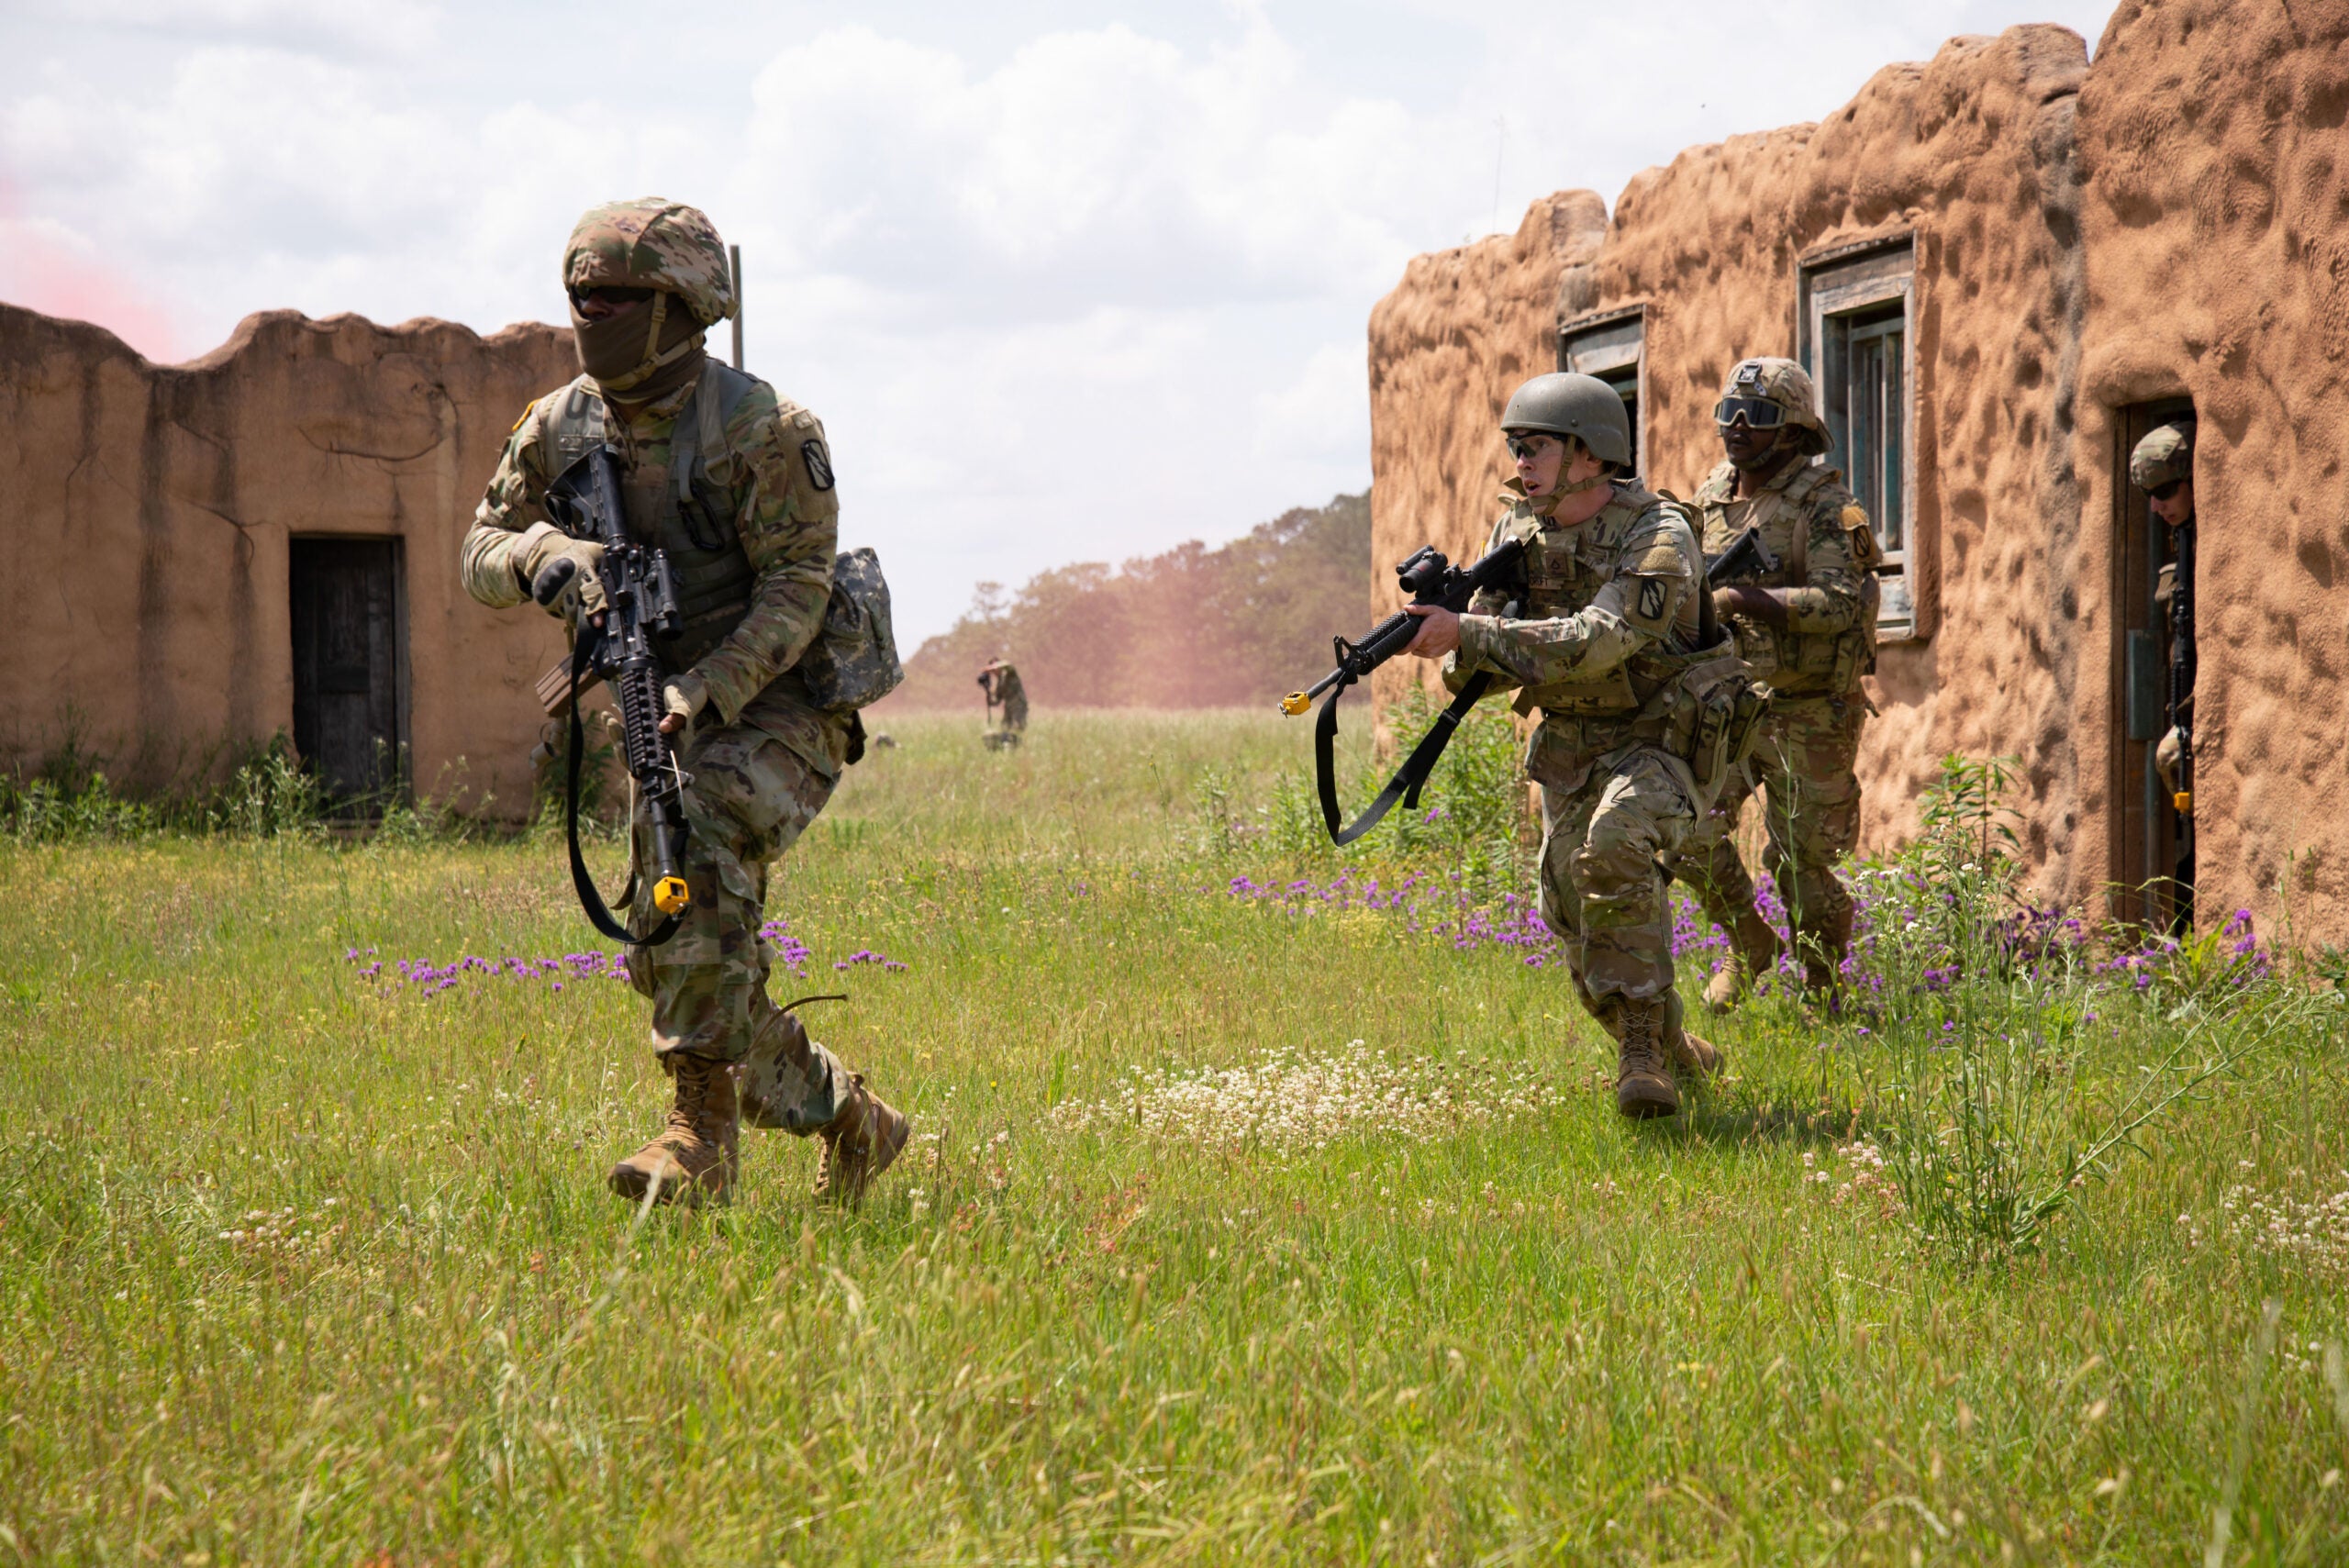 U.S. Army Soldiers with 1st Squadron, 98th Cavalry Regiment, 155th Armored Brigade Combat Team, Mississippi Army National Guard, conduct Military Operations in Urban Terrain (MOUT) training during a Proof of Concept exercise at Camp Shelby Joint Forces Training Center, Mississippi, April 29, 2022. The exercise was a part of Southern Strike 2022, a special operations-centric exercise that promotes interoperability between special forces, conventional ground forces, and air assets in order to ensure the U.S. military stays relevant and ready to respond to a peer-to-peer, large-scale combat operation. (U.S. Air National Guard photo by Tech. Sgt. Charles Wesley)